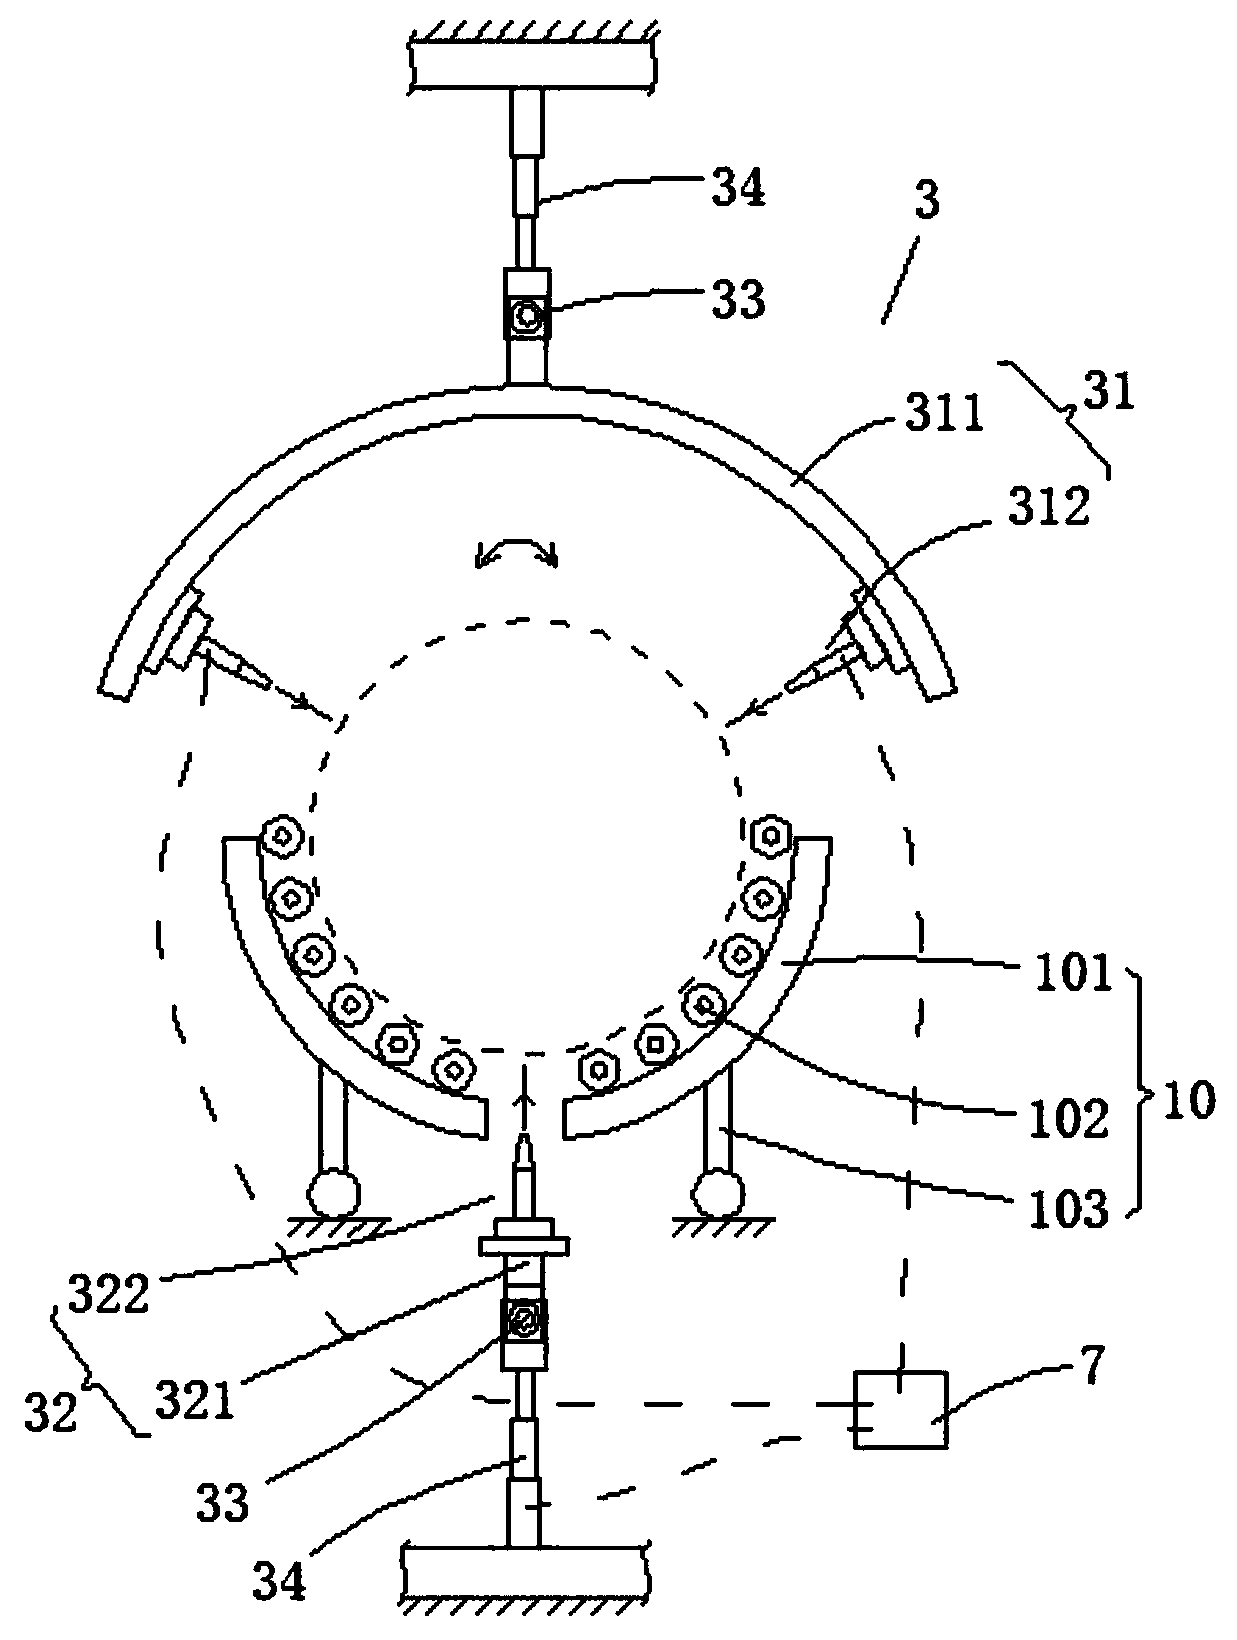 Flange connecting piece visual detection and center hole perforating device